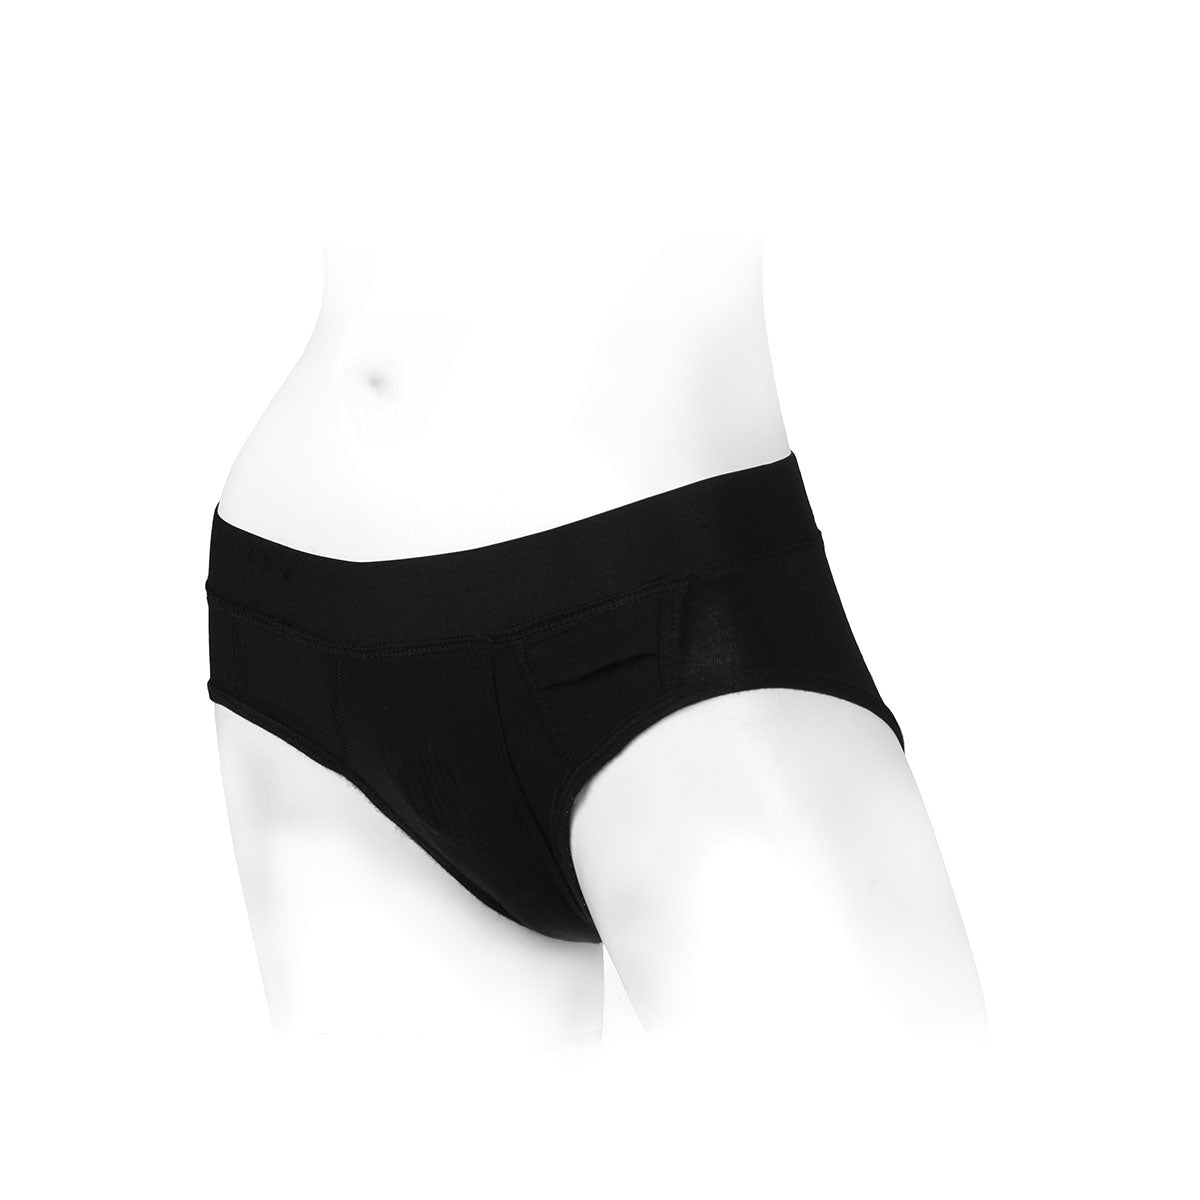 SpareParts Tomboi Rayon Brief Harness Black Size S